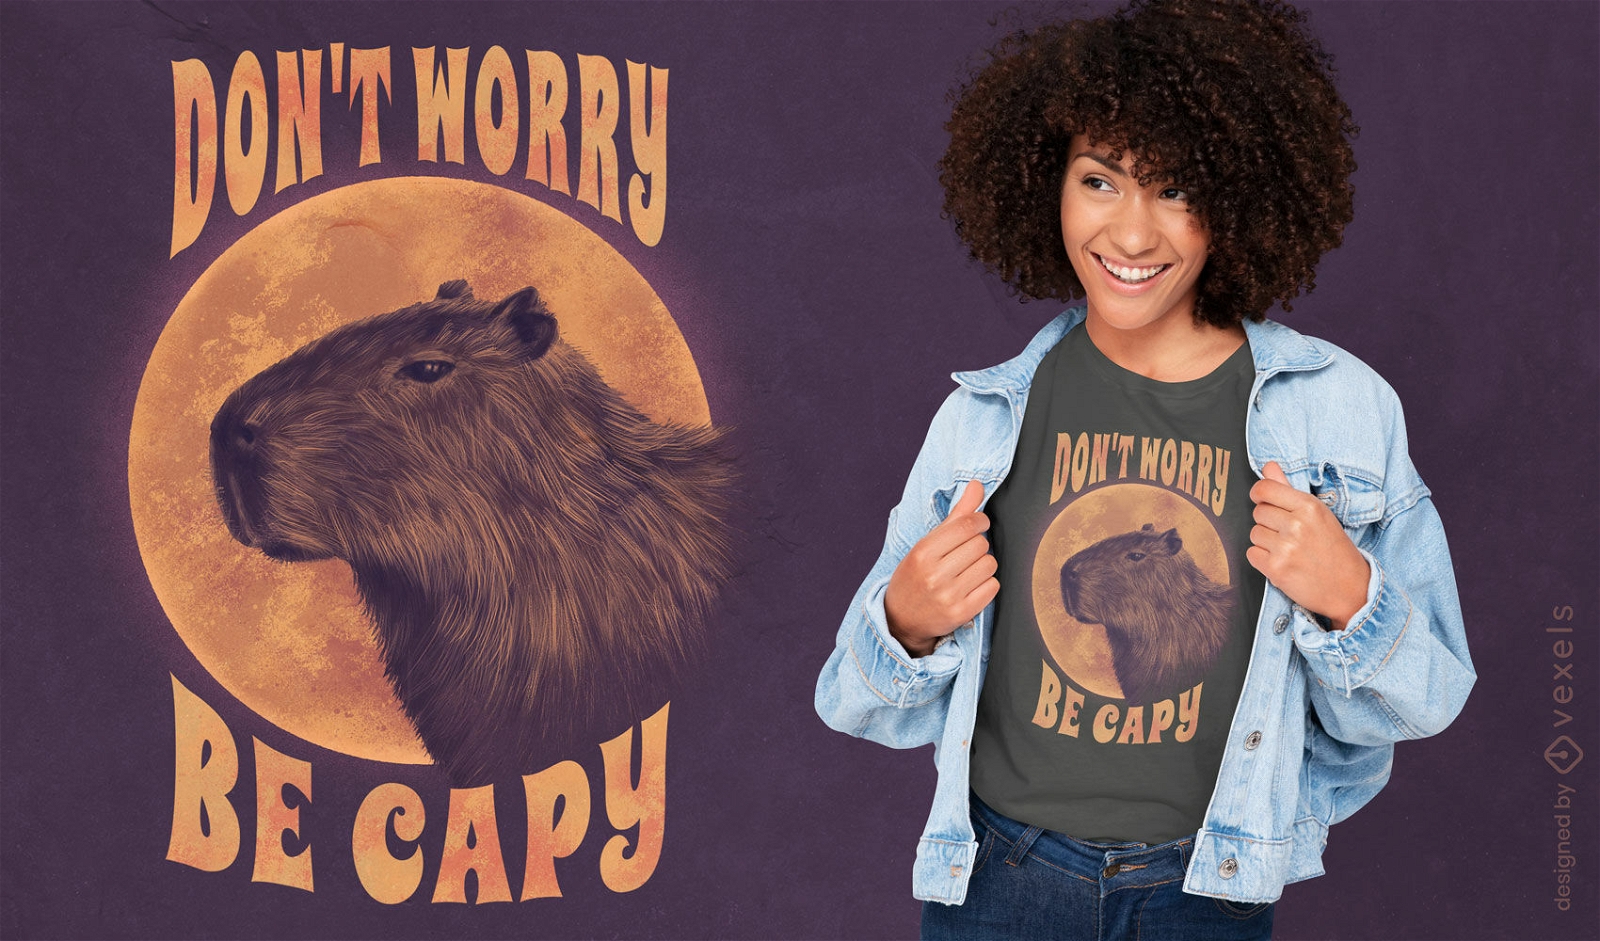 Don't worry be capy t-shirt design